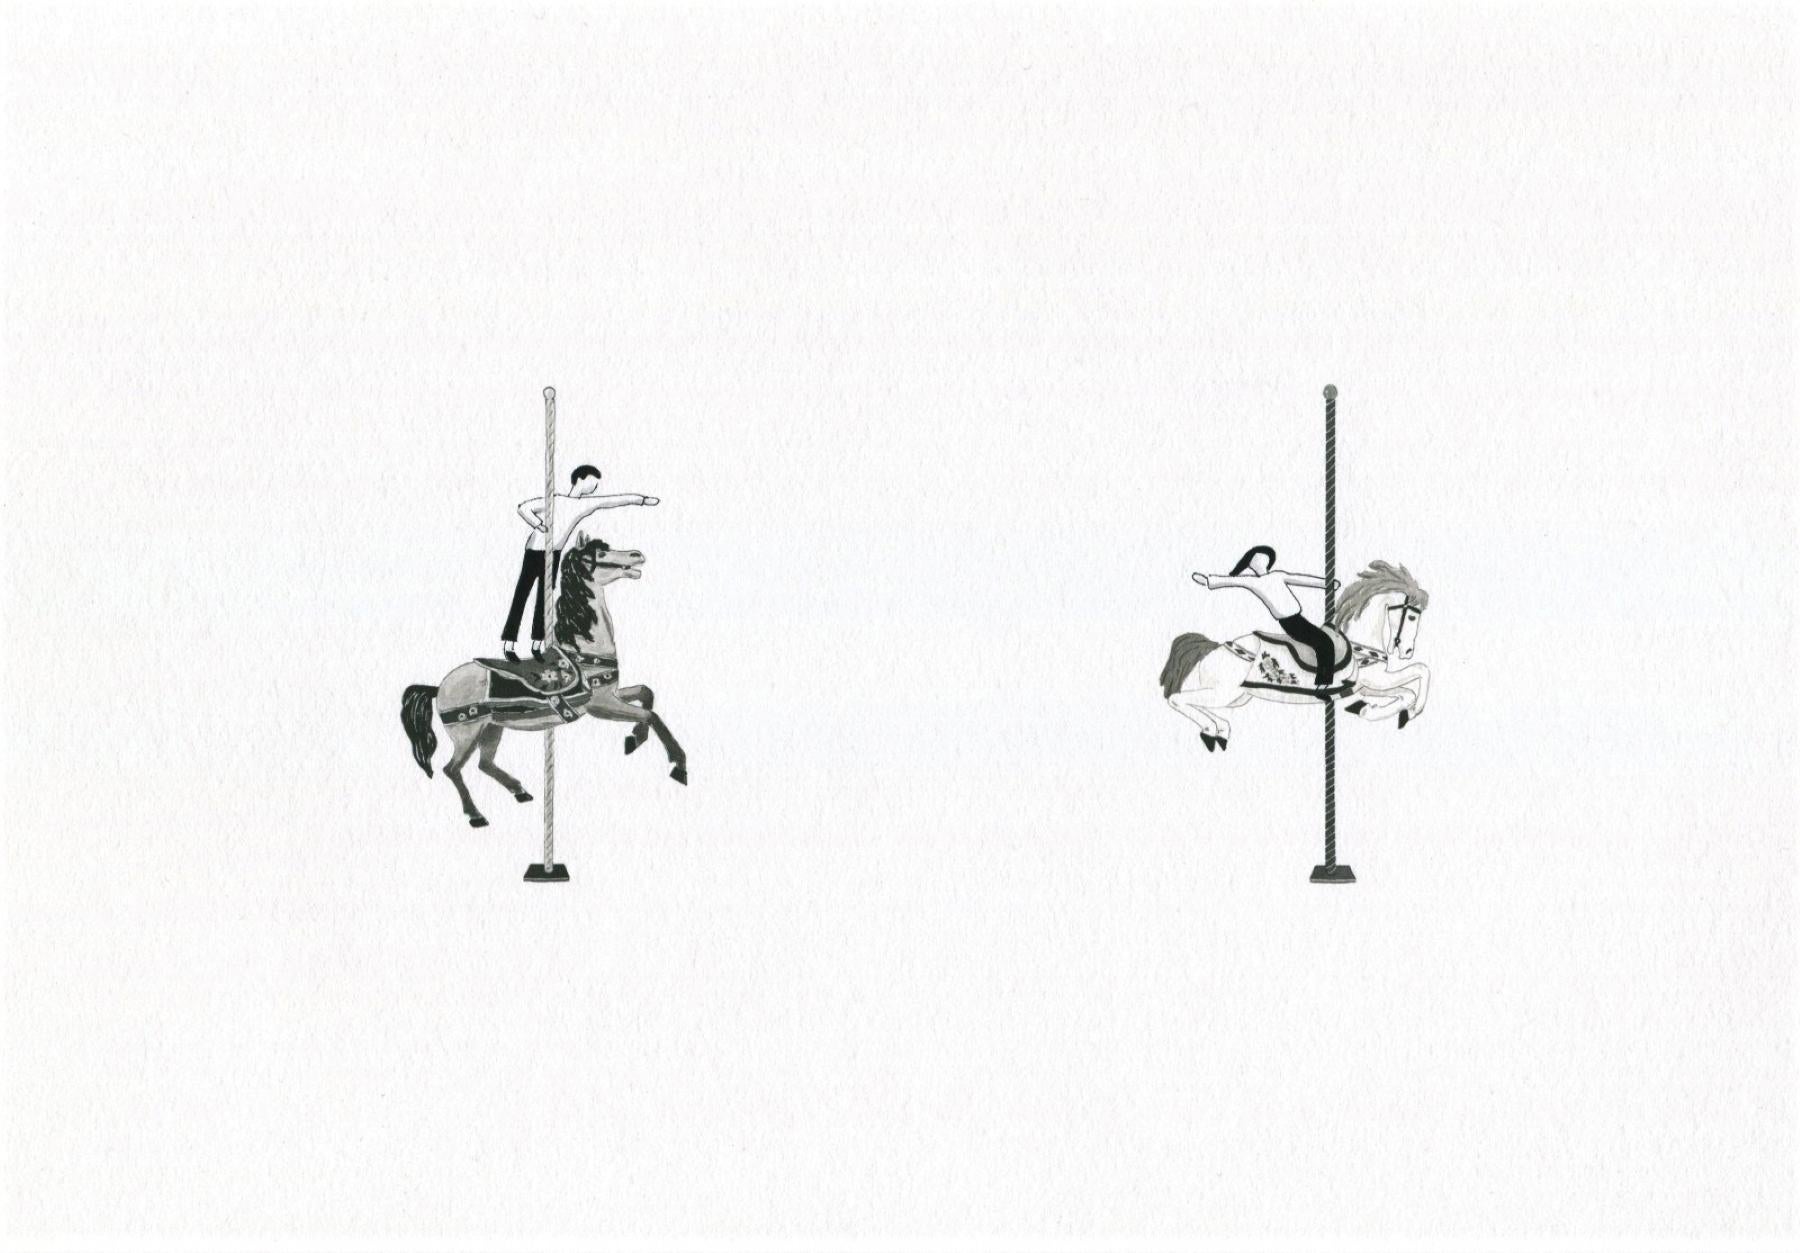 Kin Choi Lam Figurative Print - "Merry-go-round" archival print on paper couple relationship love minimalism